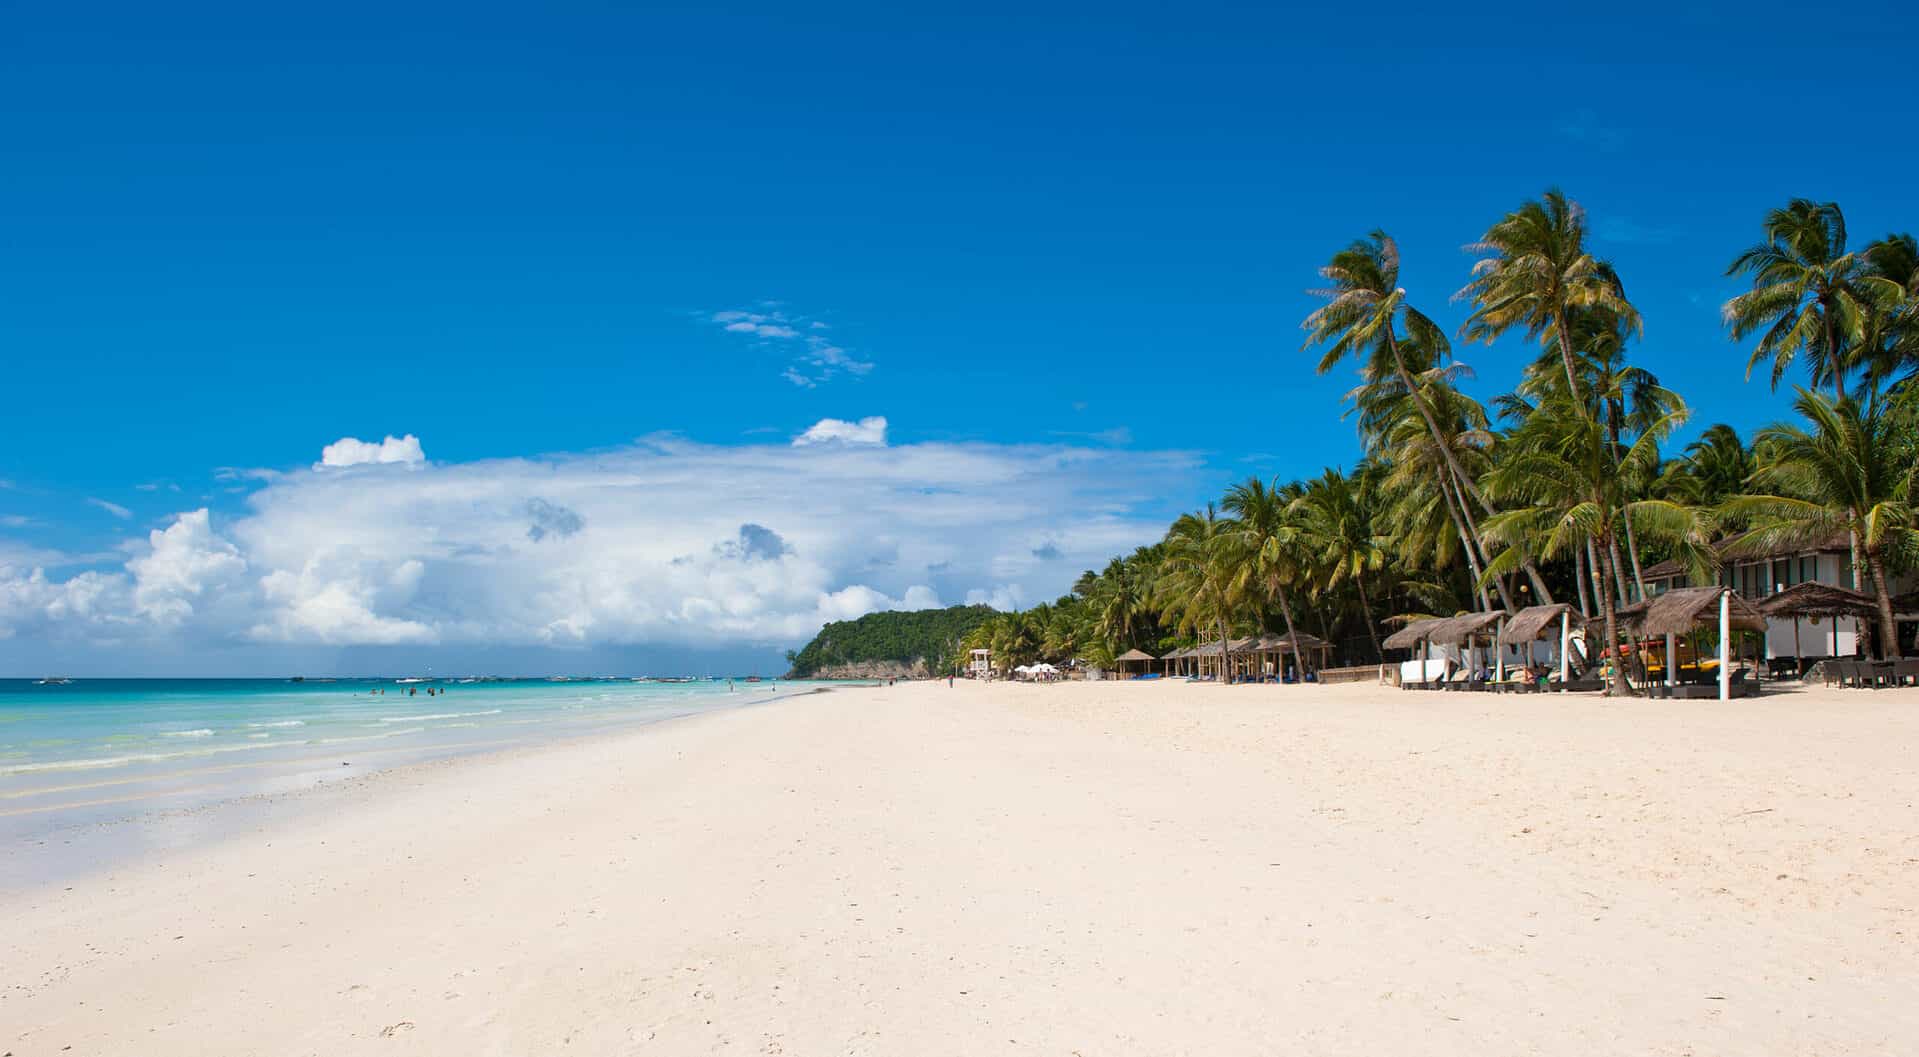 How to get to Boracay from Manila, Philippines